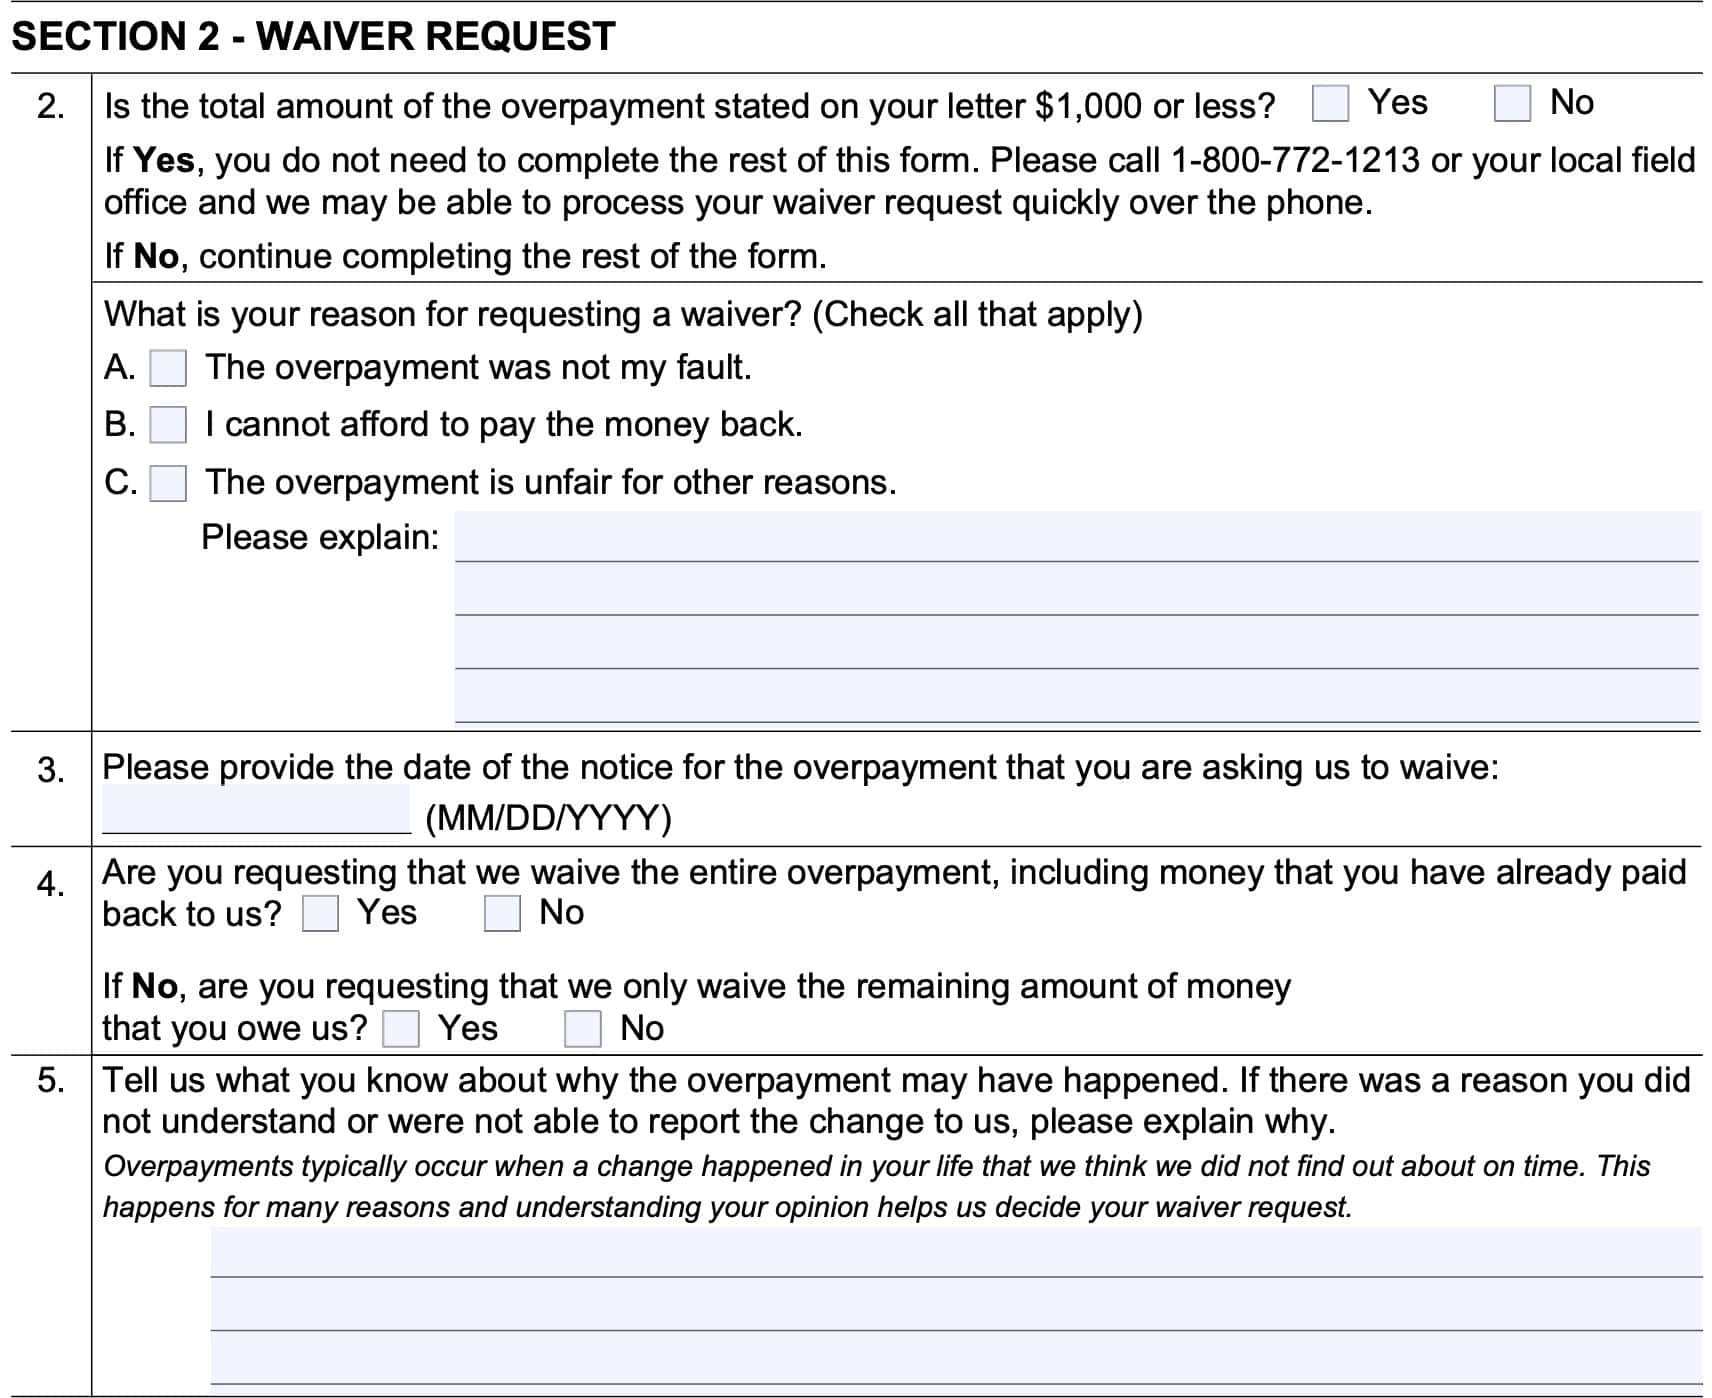 section 2: waiver request